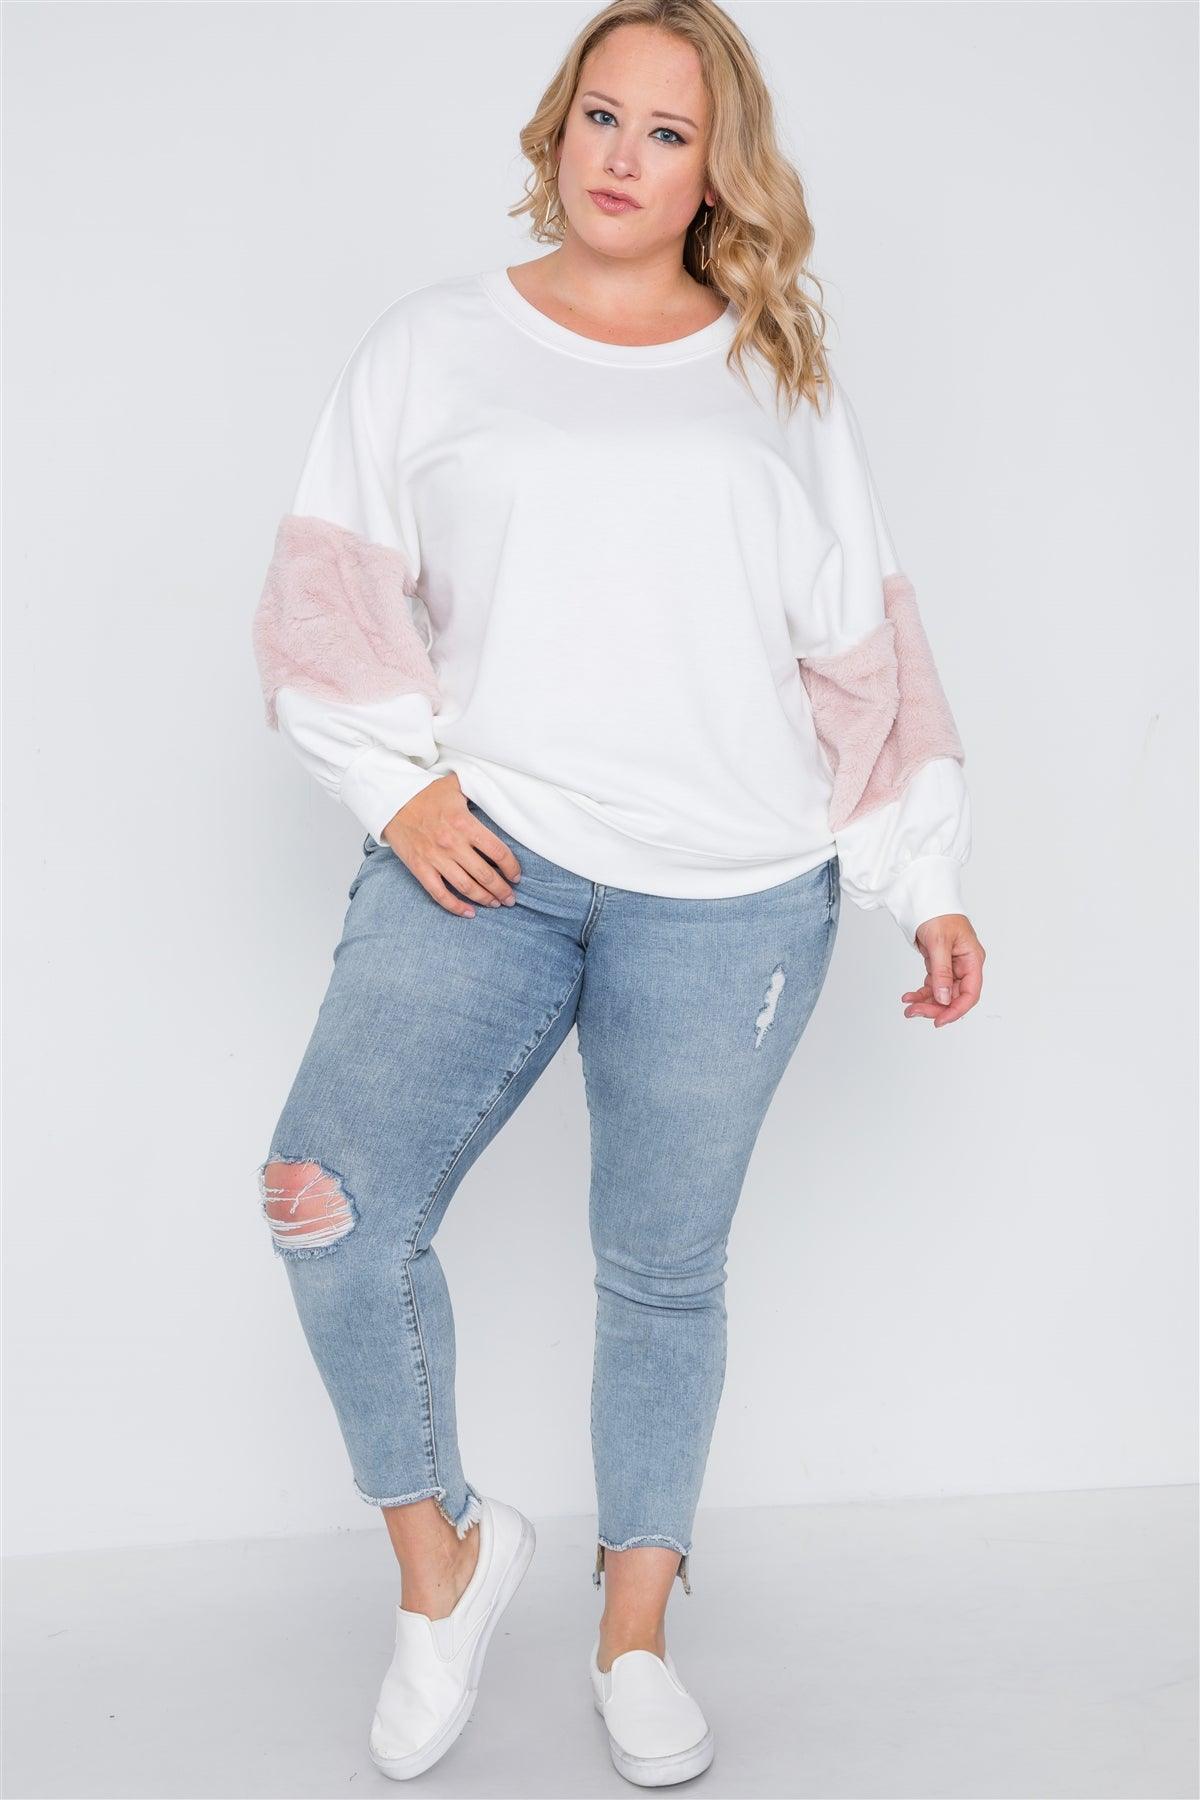 Plus Size Off White Faux Fur Pink Sleeves Sweater /2-2-2